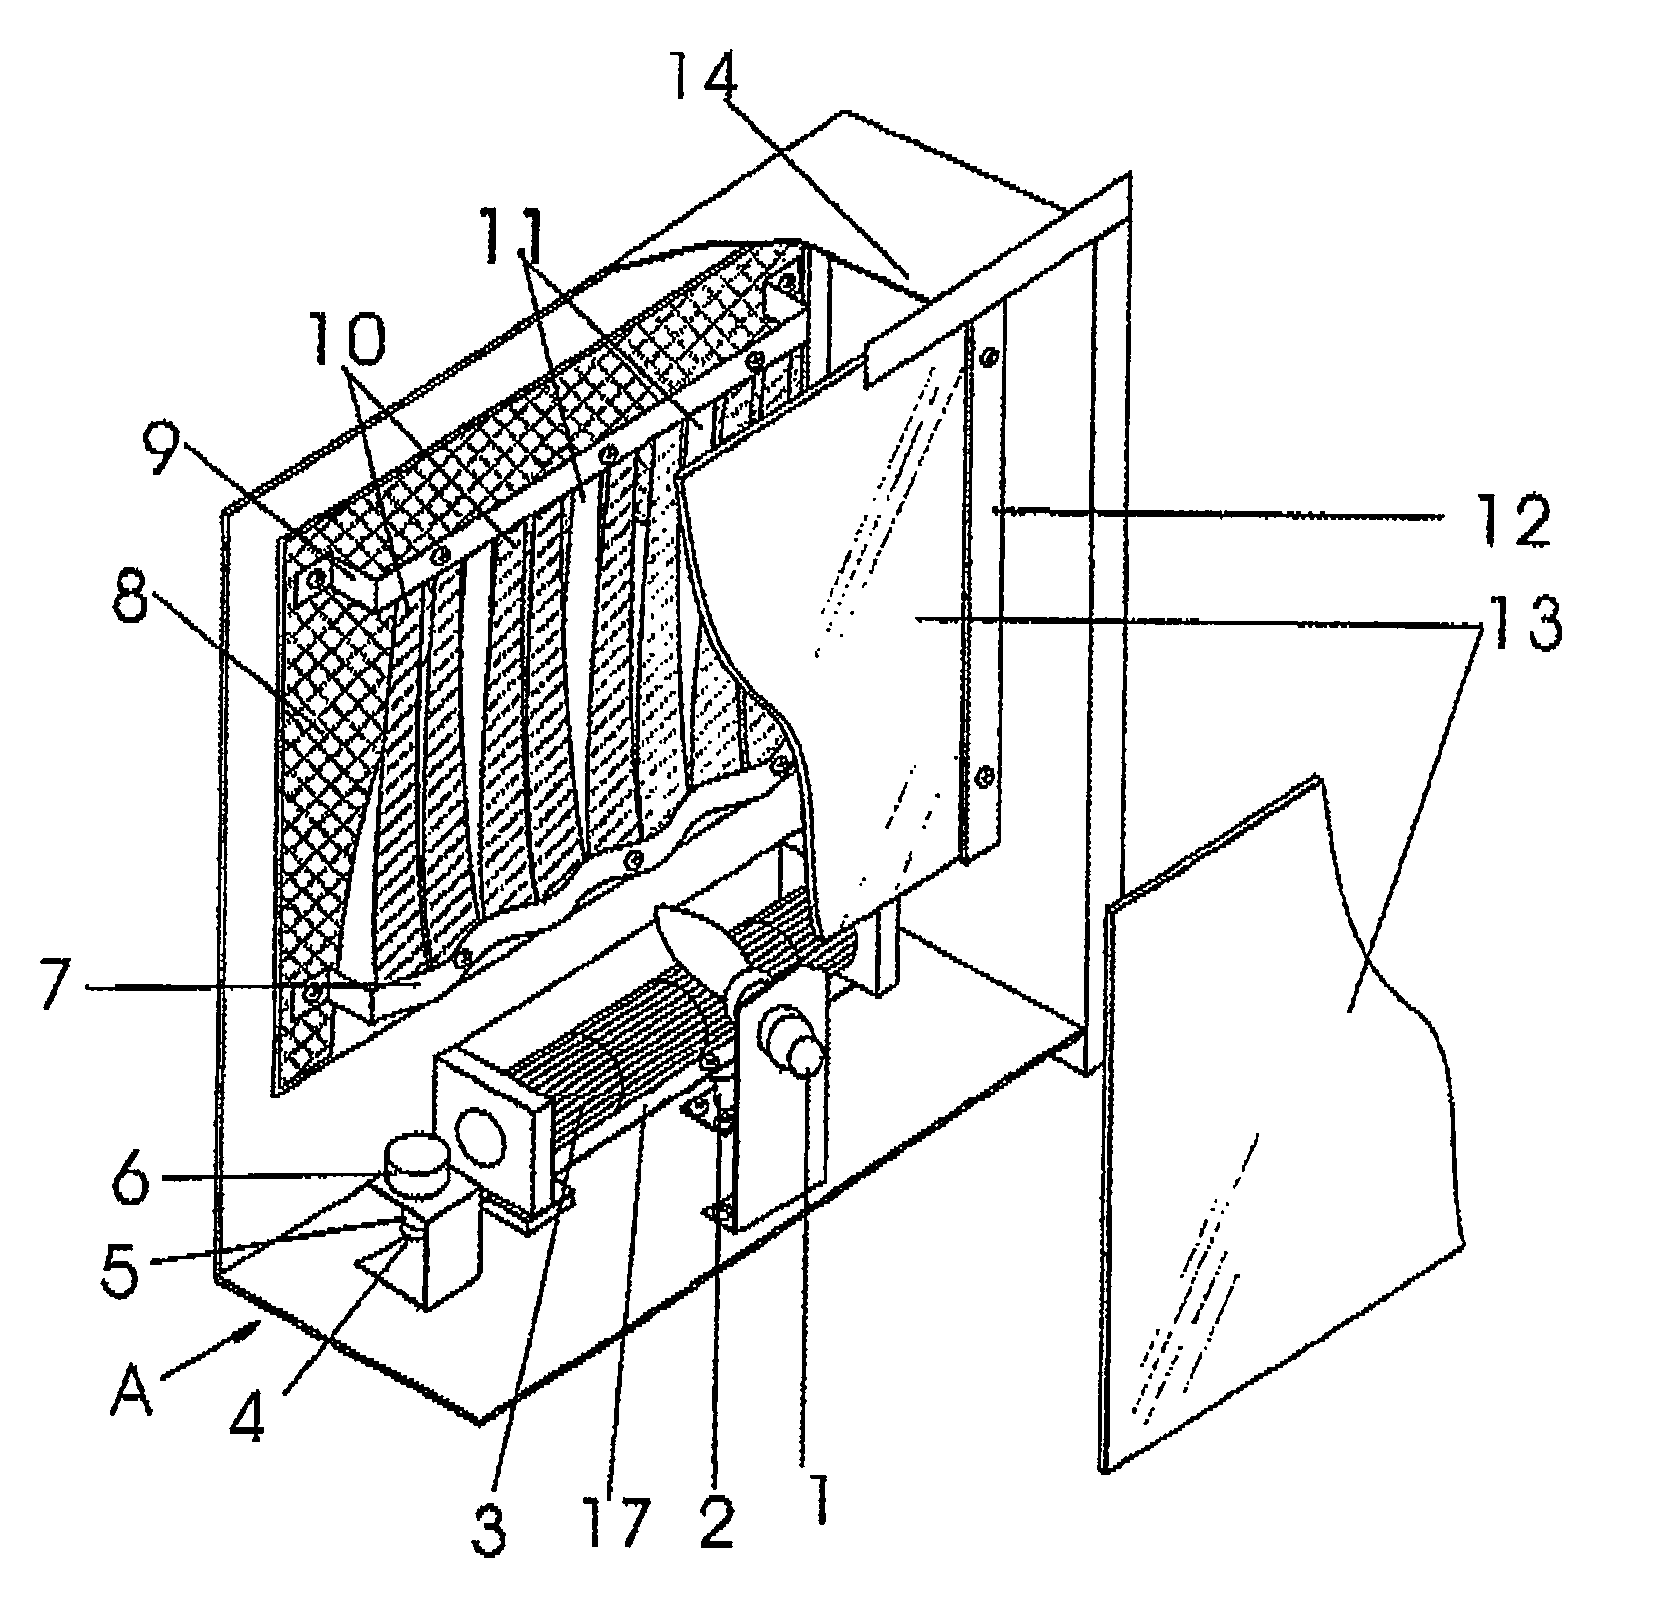 Flame imitation manufacturing device of an electrical-heated fireplace